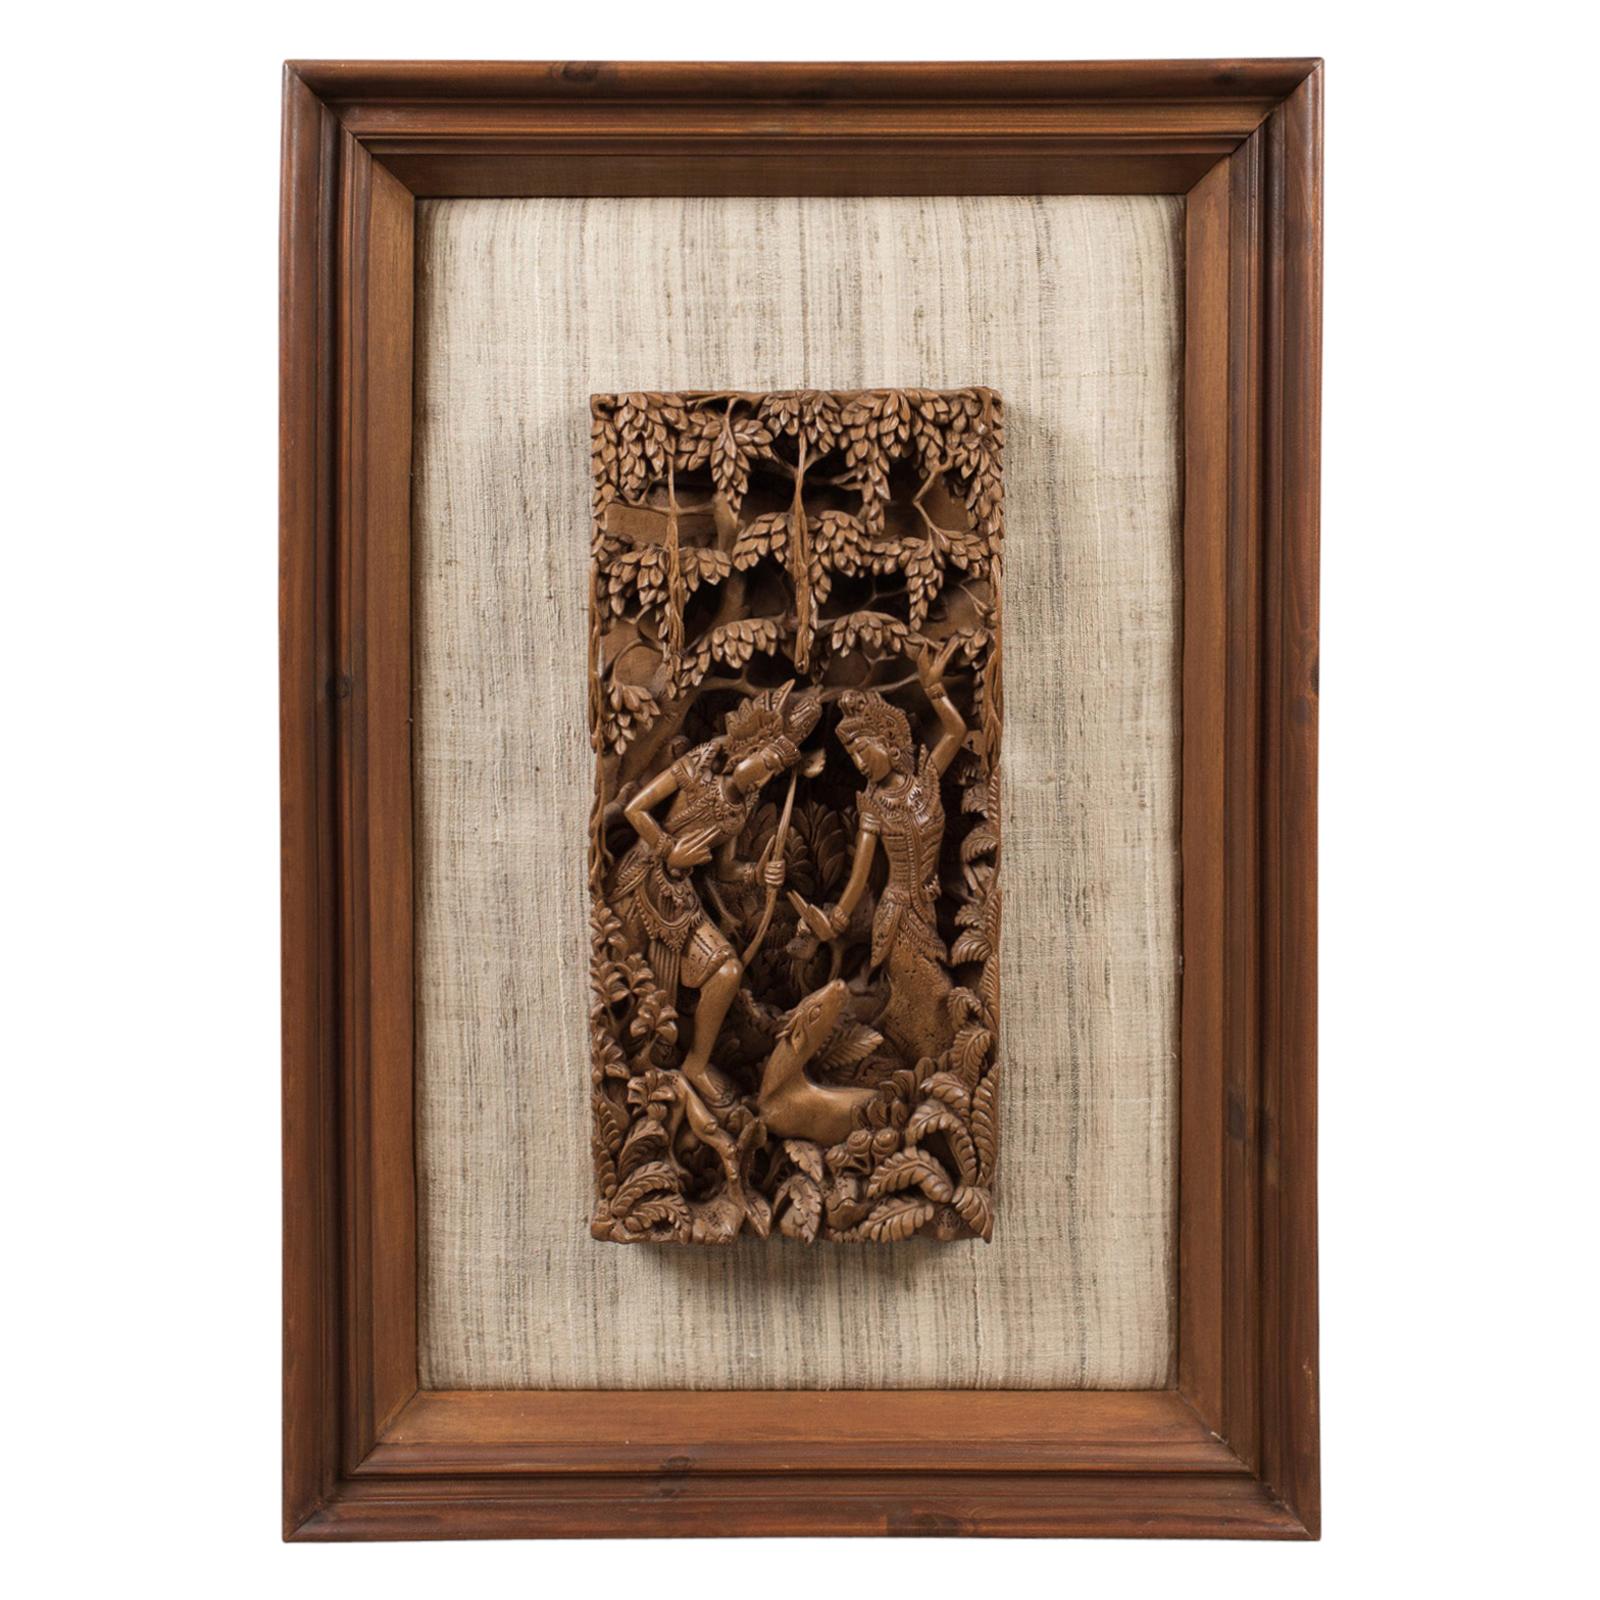 Framed Balinese Carved Wall Panel, Midcentury Decorative Art